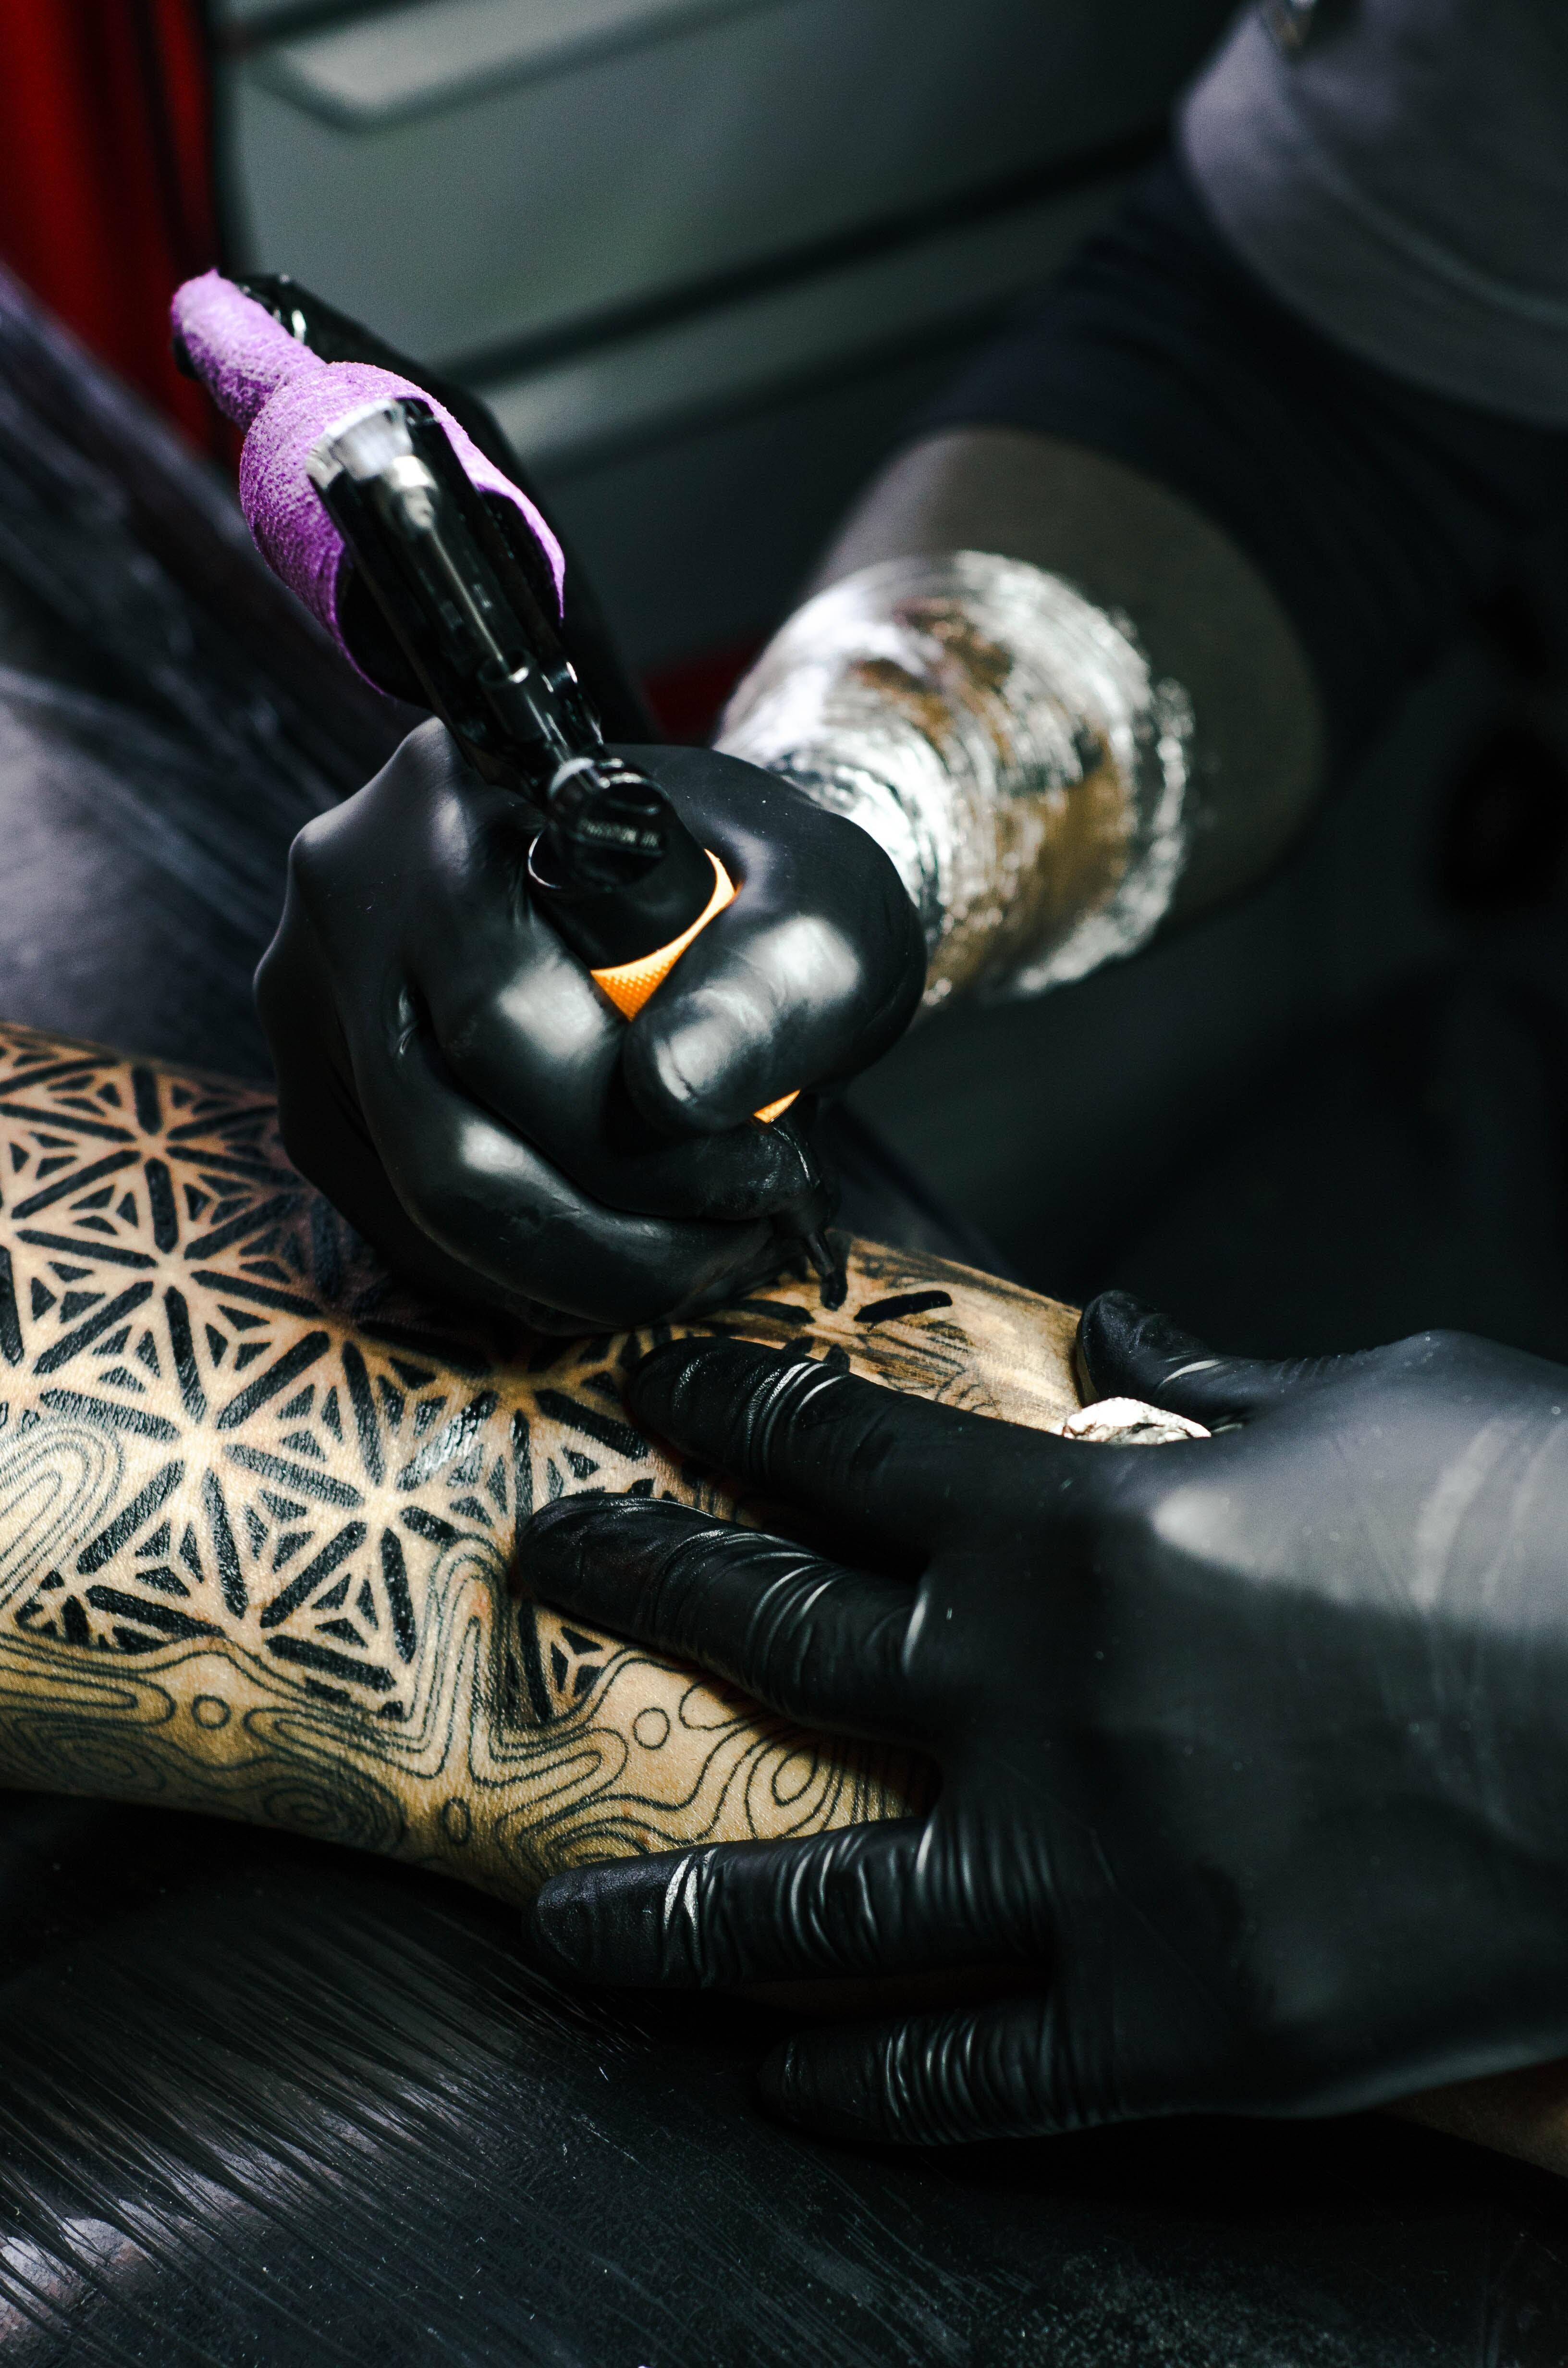 Interview with a Tattoo Artist  Job Shadow